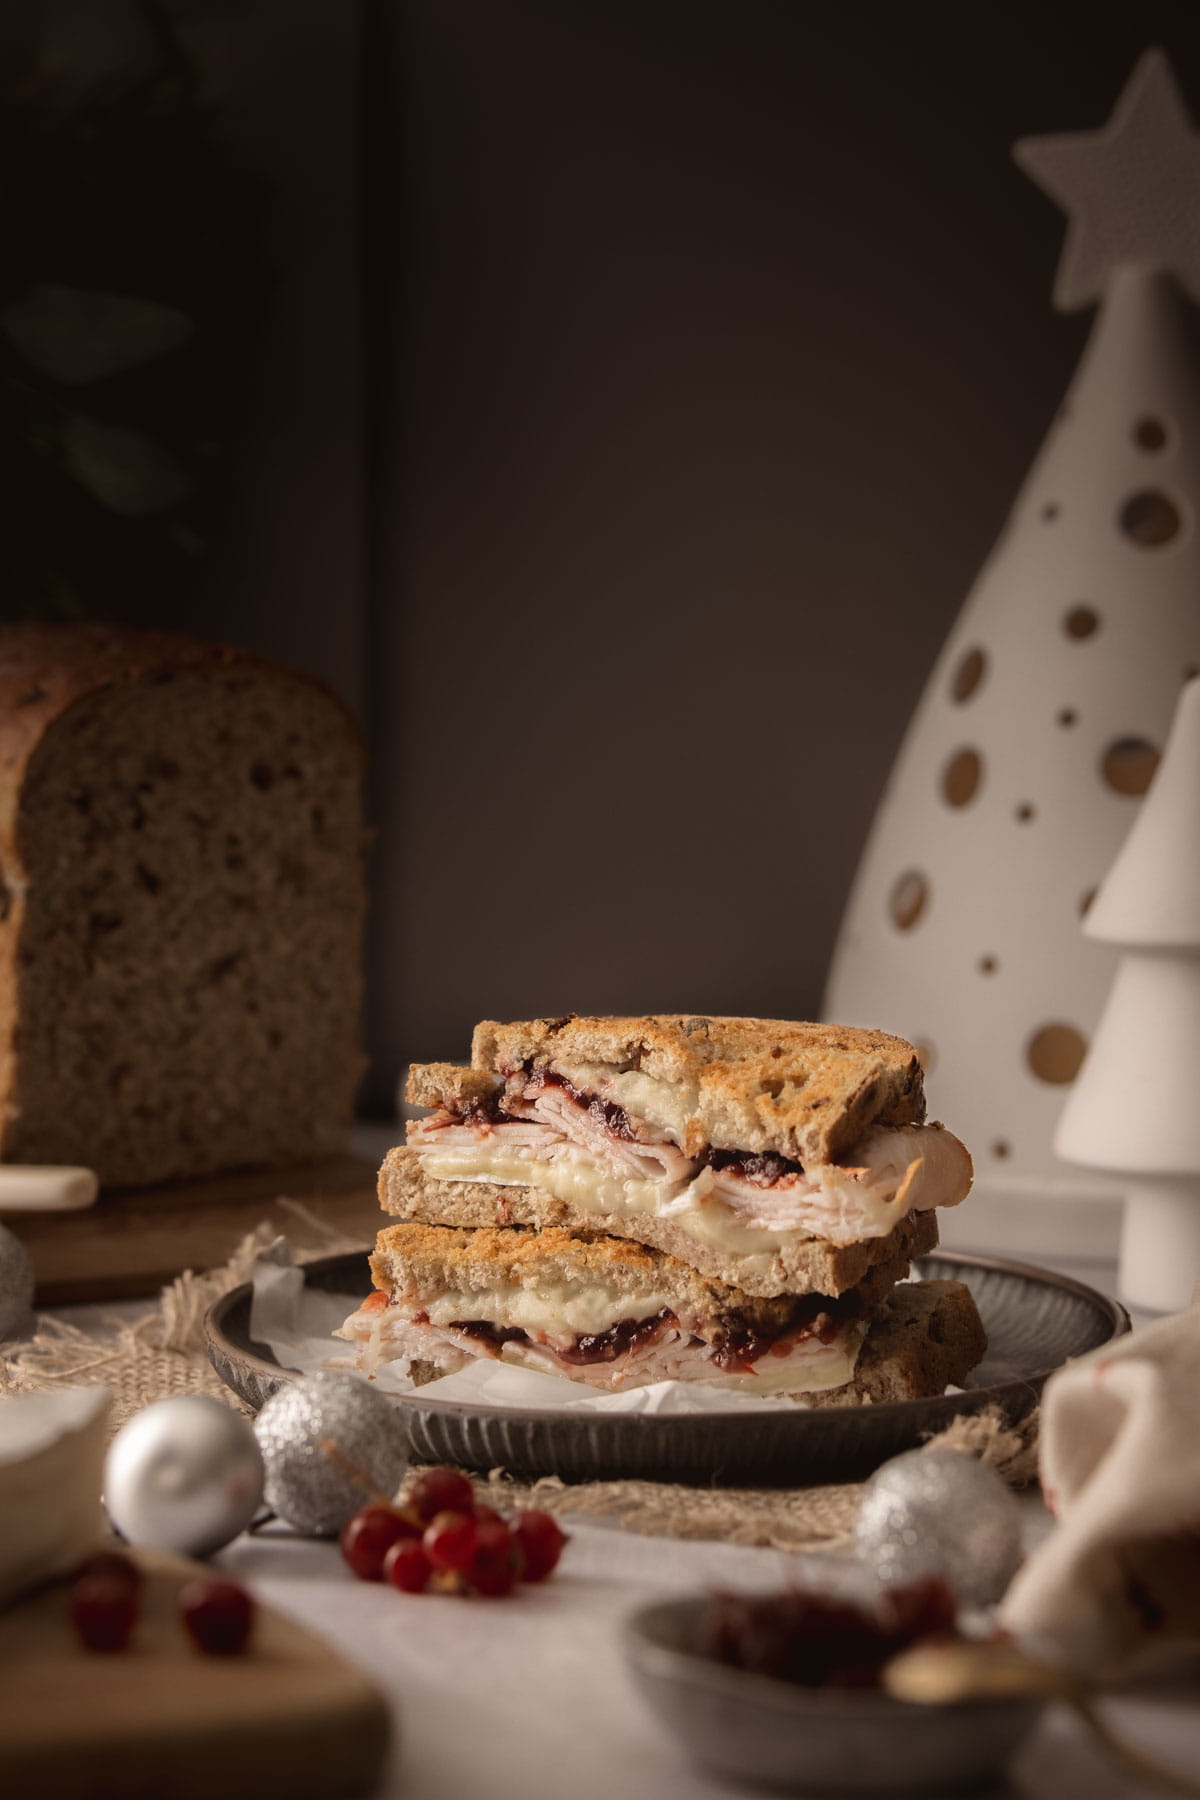 A vintage toned image of a Boxing Day Leftovers sandwich filled with turkey, cranberry and brie cheese - Photography and styling by Lou Carruthers, Food Photographer